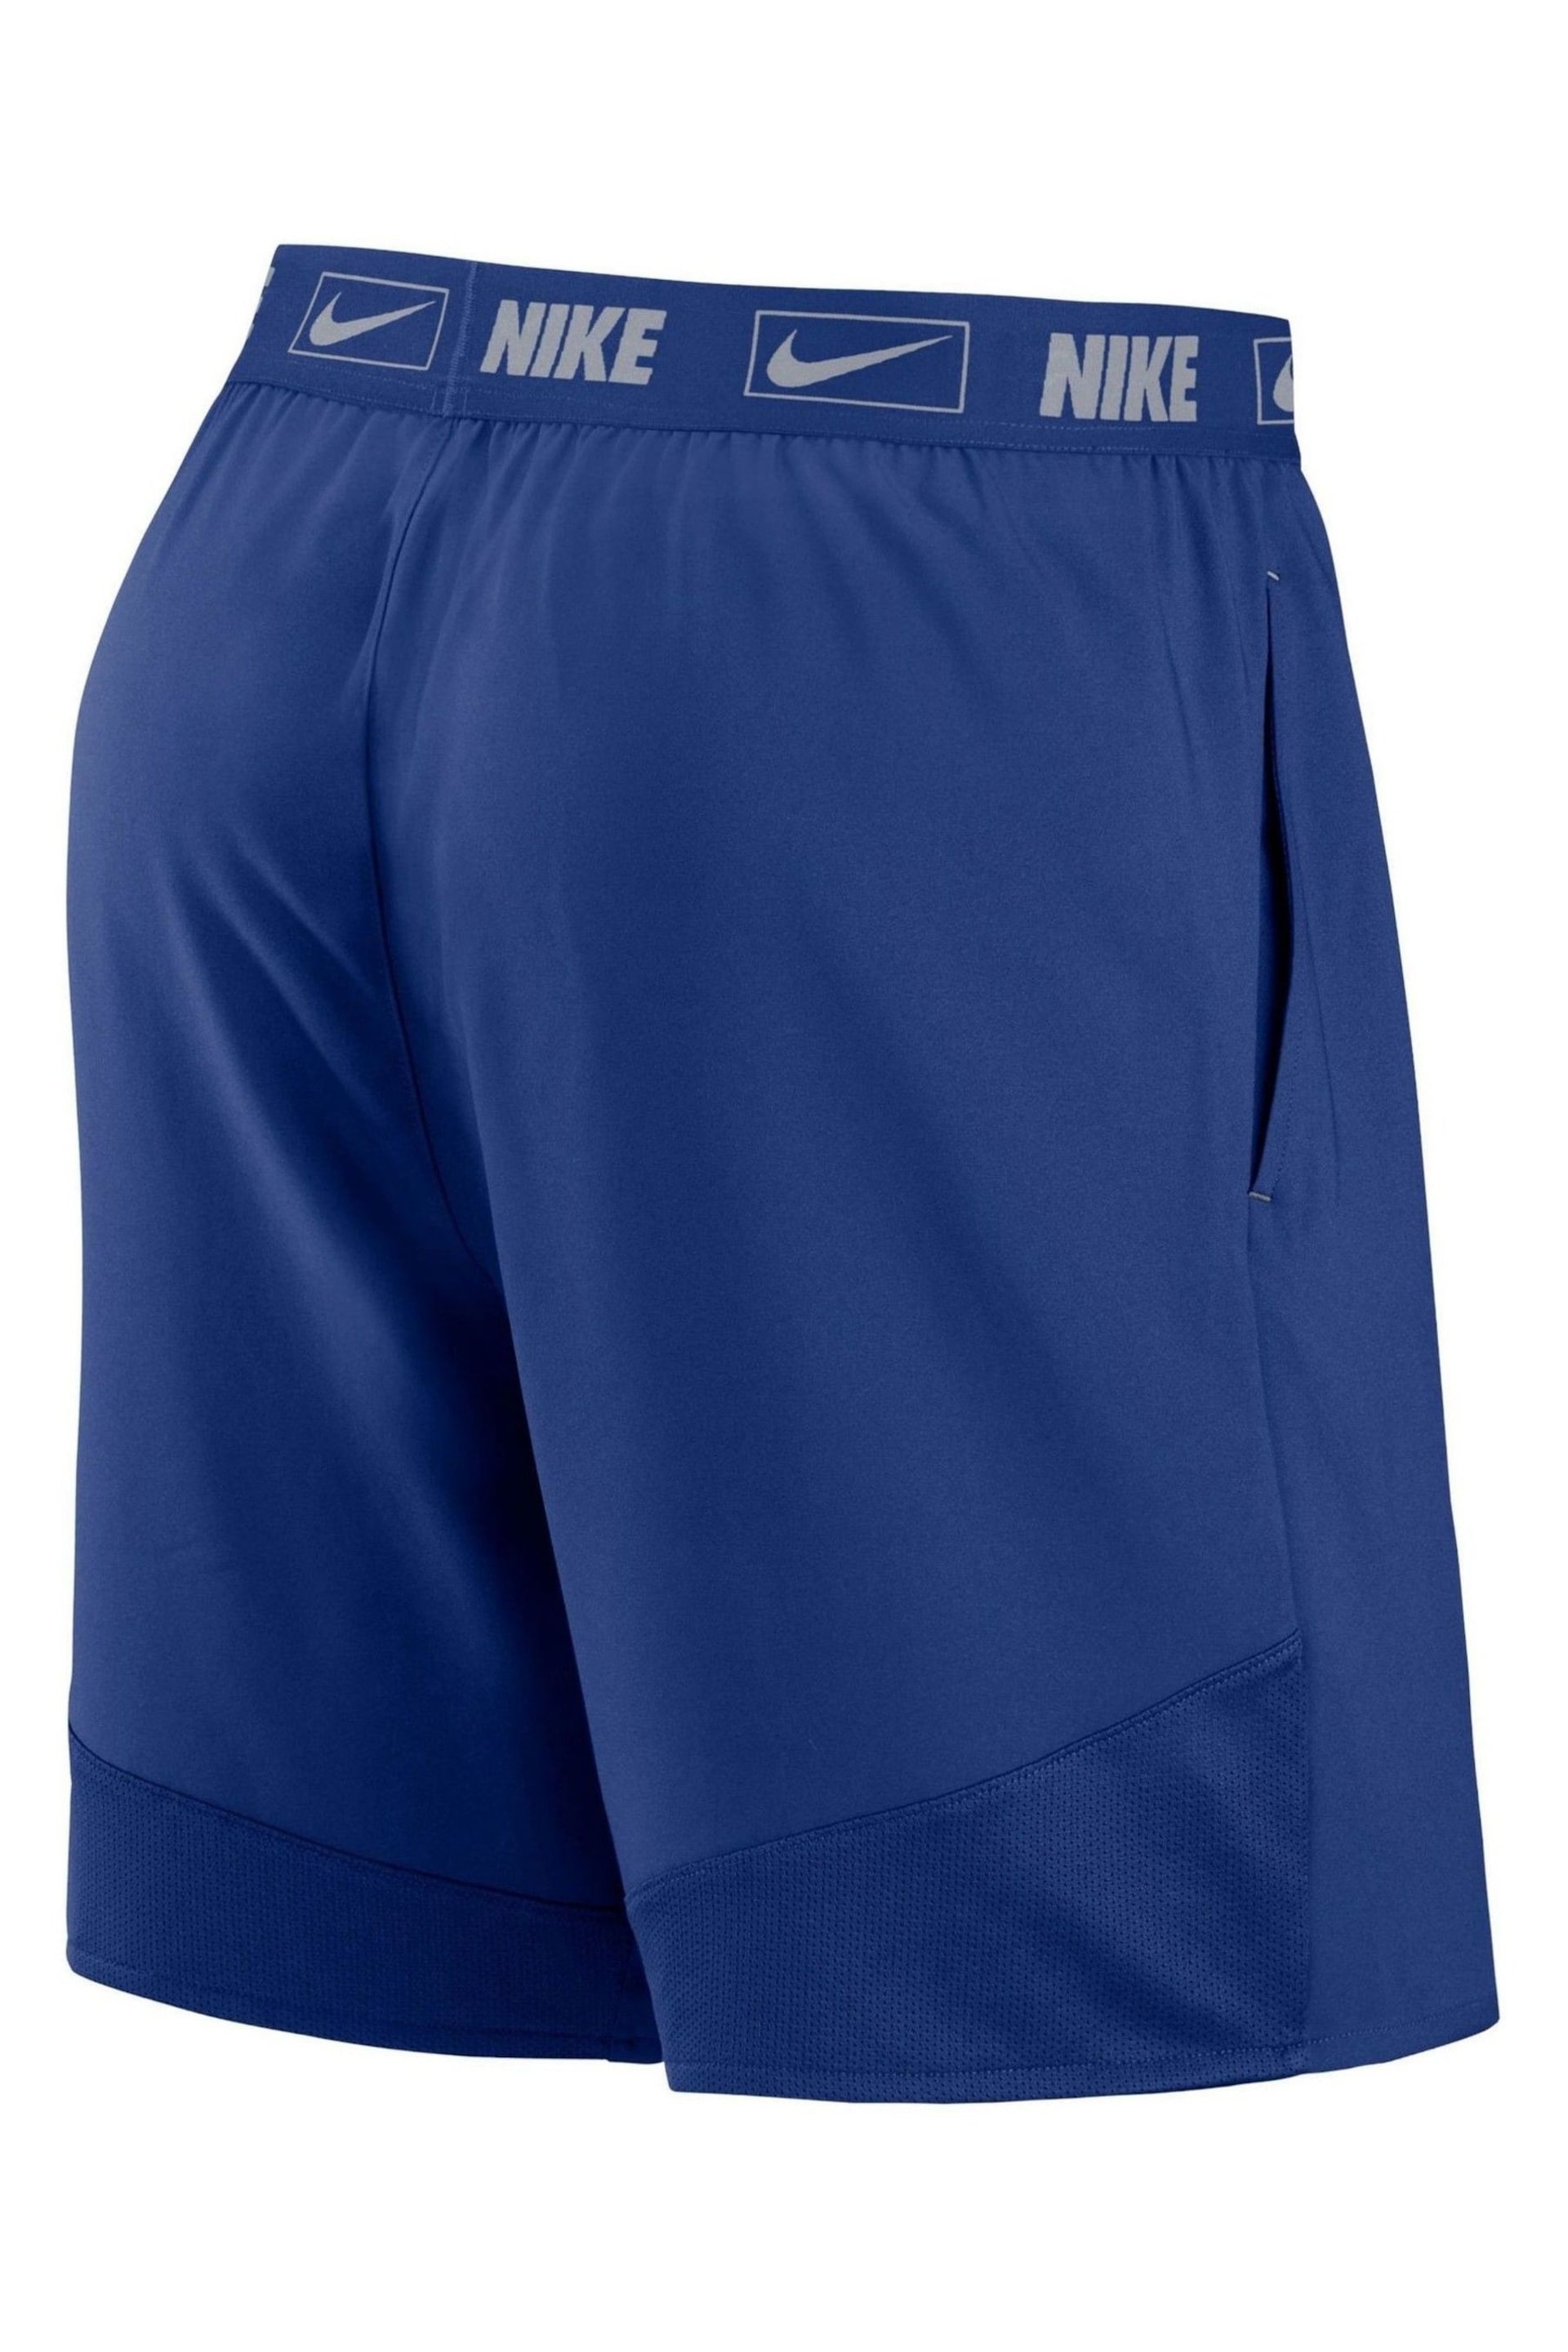 Nike Blue Chicago Cubs Bold Express Woven Shorts - Image 3 of 3